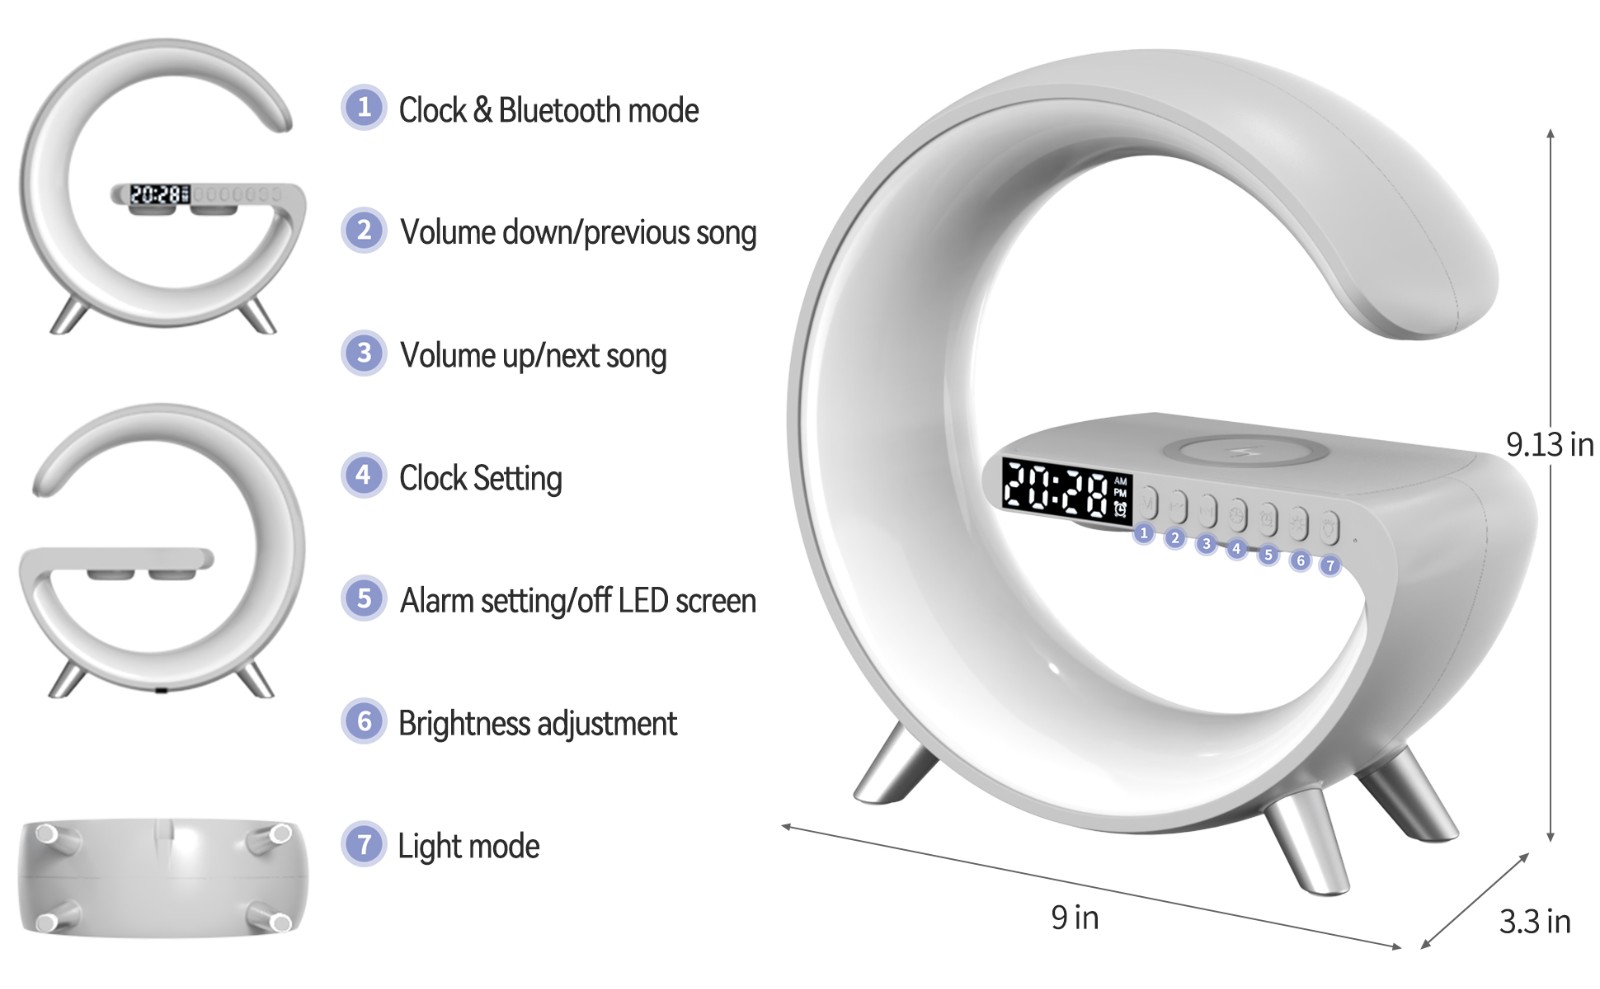 Hot Sale 10W Luxury Atmosphere Lamp All in One RGB LED Light LED Night Light Wireless Charger With Alarm Clock With APP Control